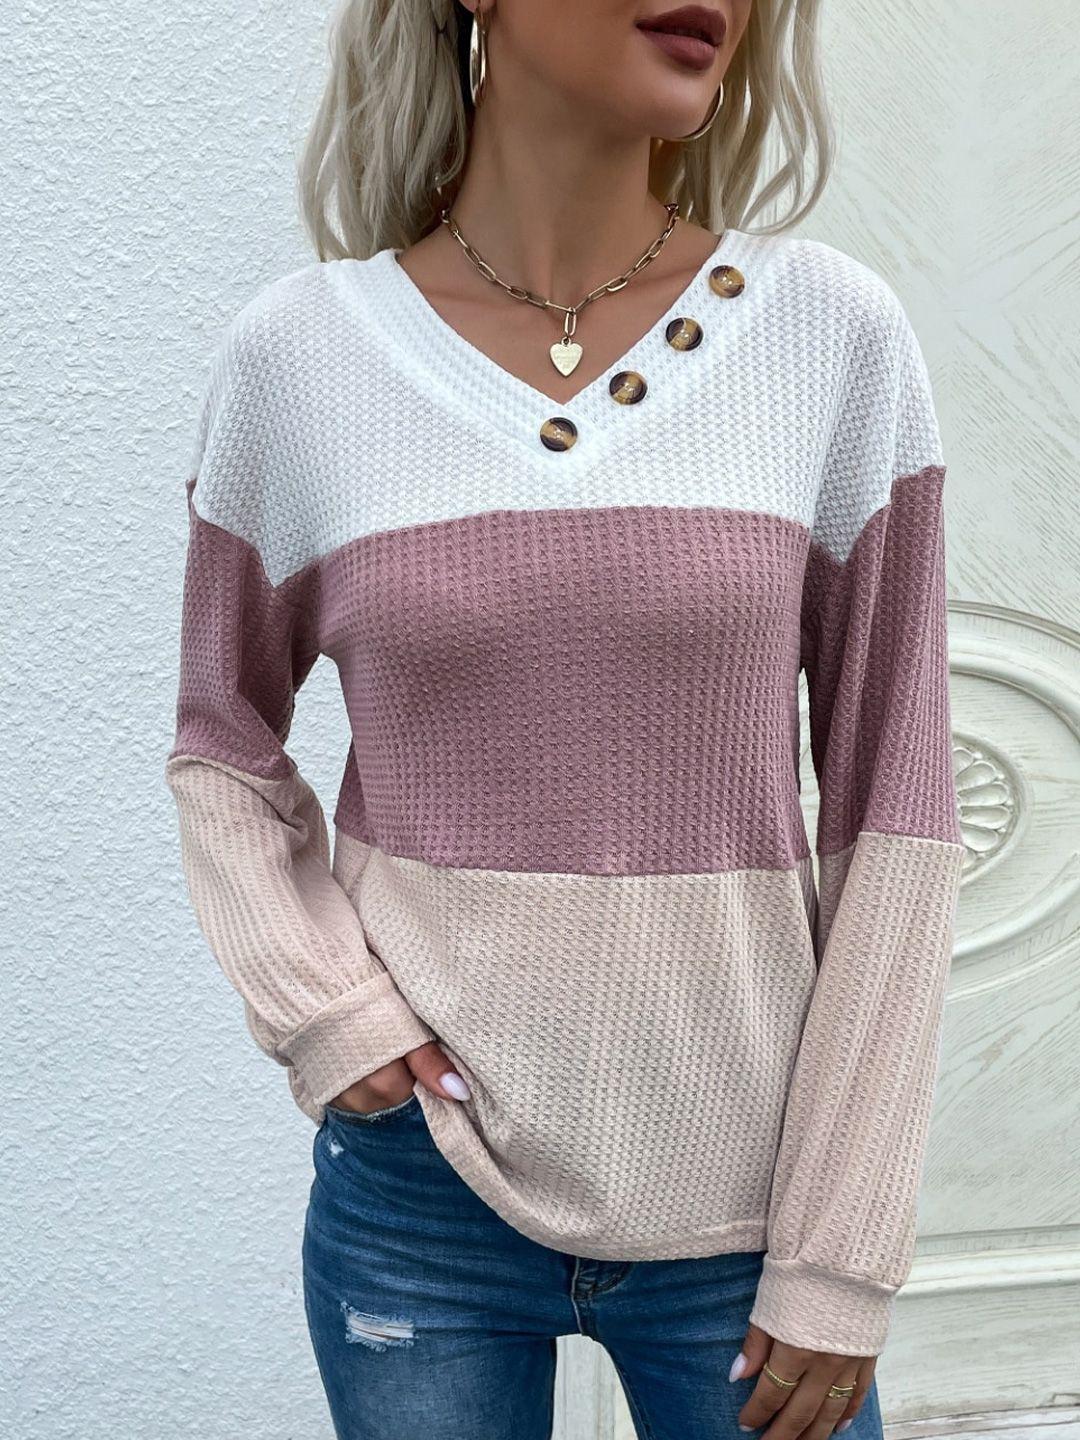 stylecast pink & white colourblocked pullover